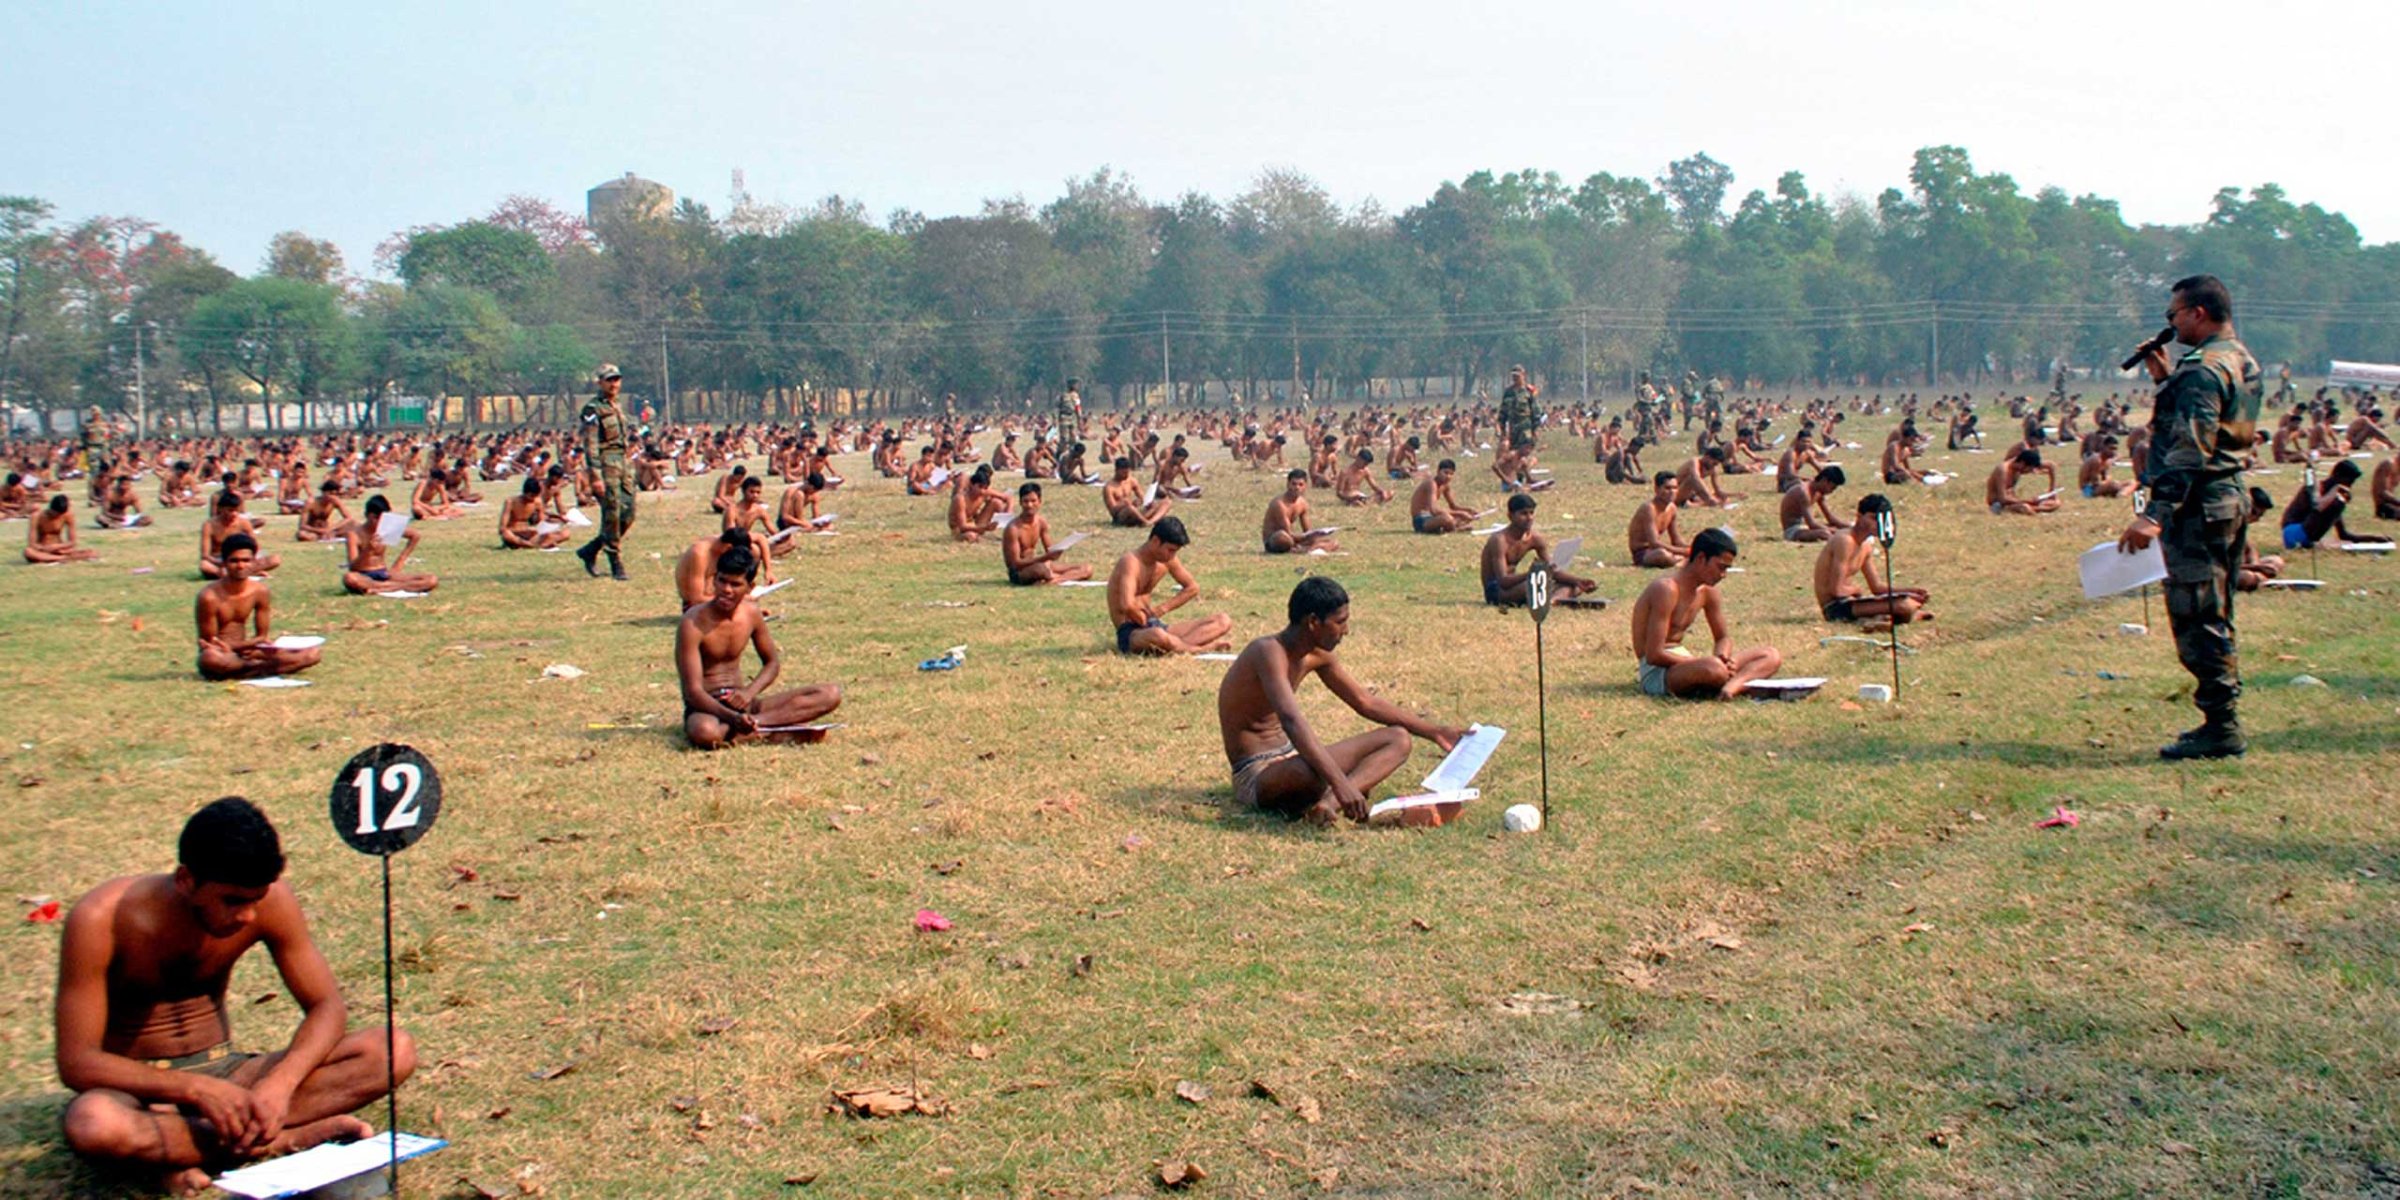 Indian army candidates sit in their underwear as they take a written exam in a field after being asked to remove their clothing to deter cheating in Muzaffarpur, India, Feb. 28, 2016.